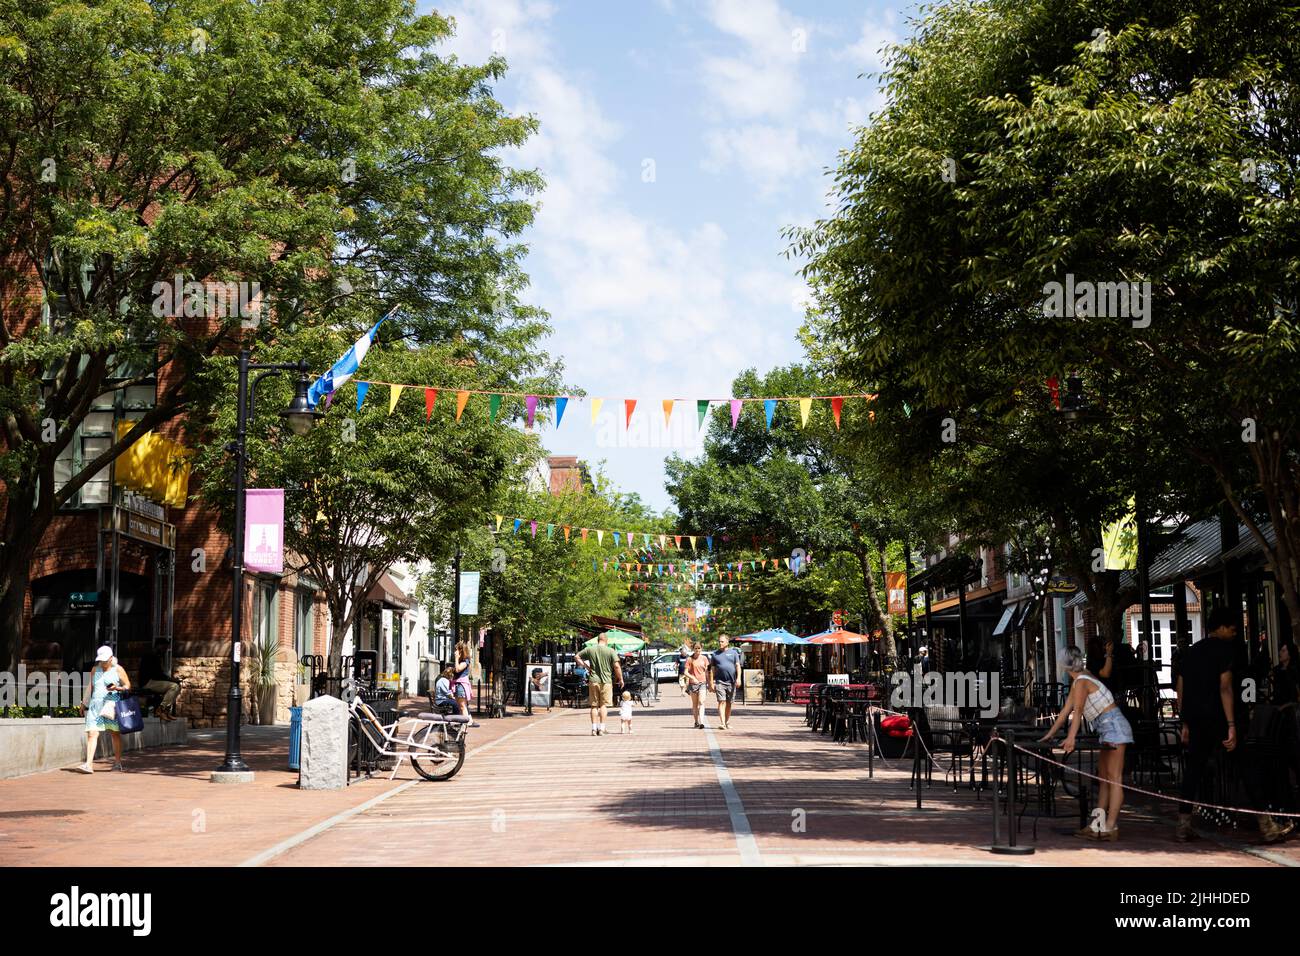 Church Street Marketplace, a pedestrian area of shops and restaurants in downtown Burlington, Vermont, USA. Stock Photo